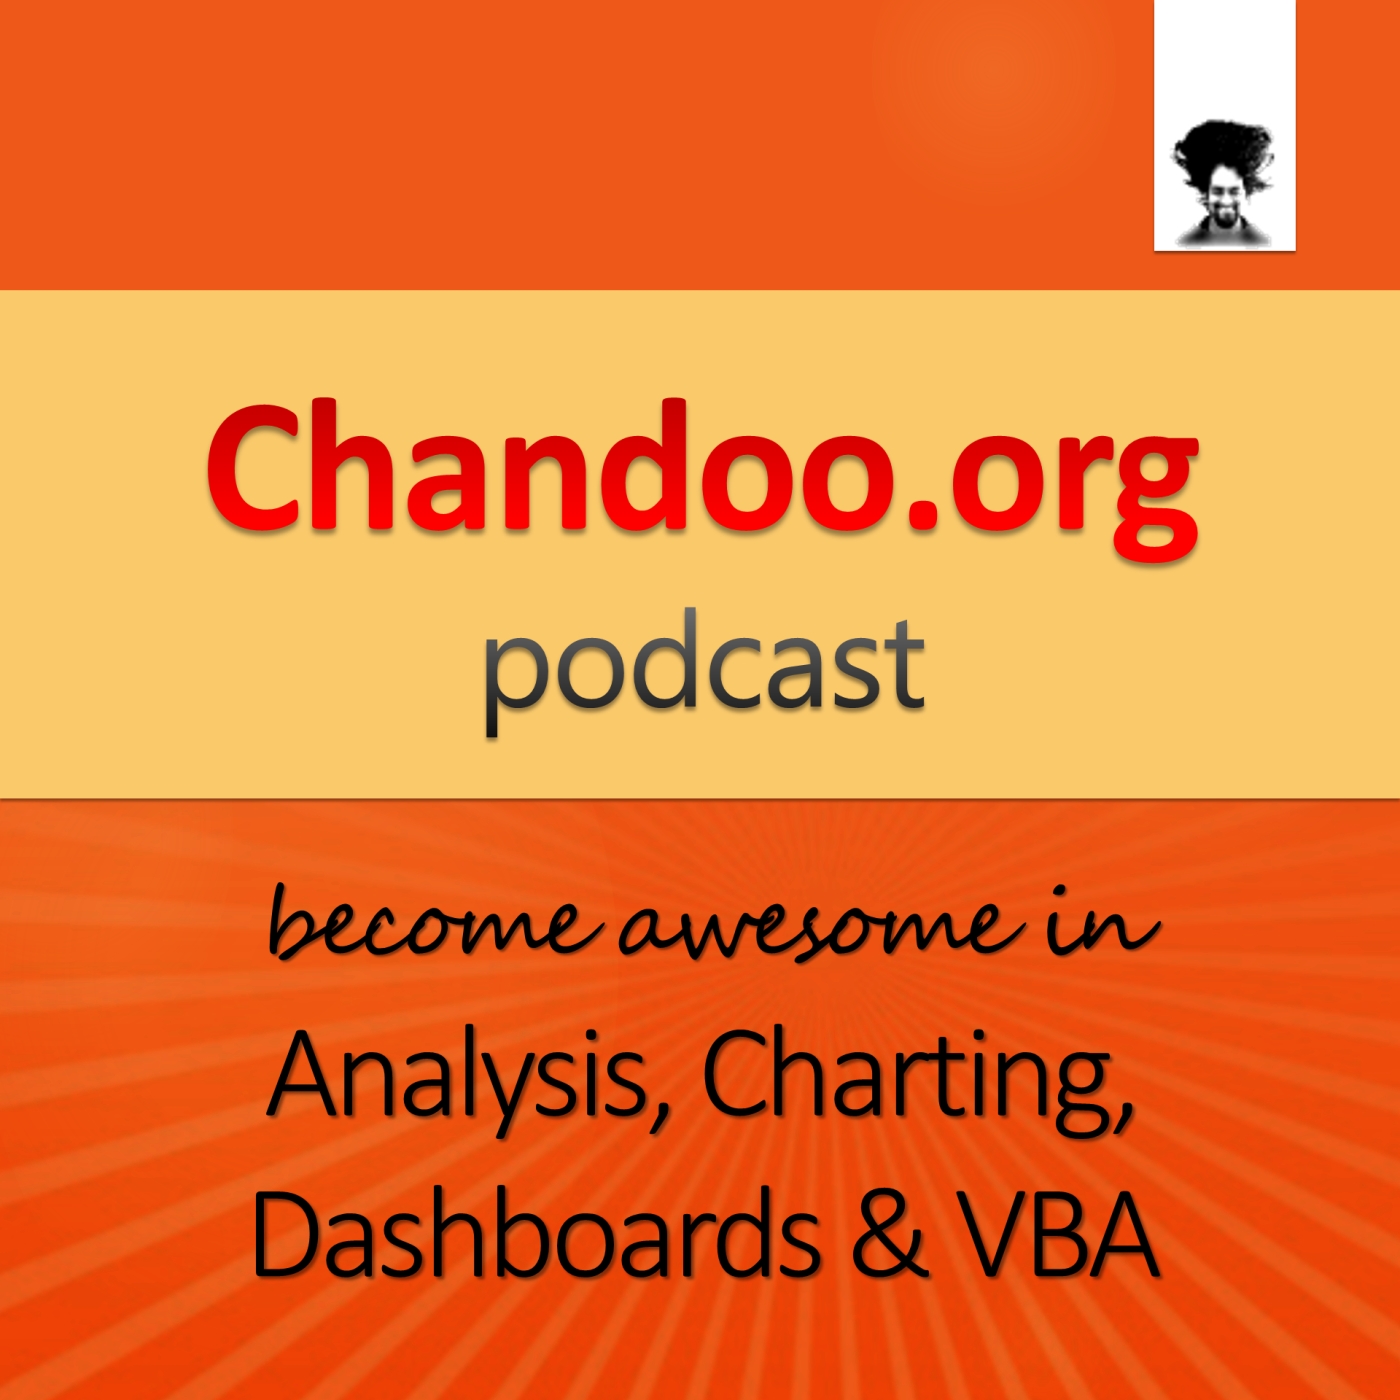 Chandoo.org Podcast - Become Awesome in Data Analysis, Charting, Dashboards & VBA using Excel